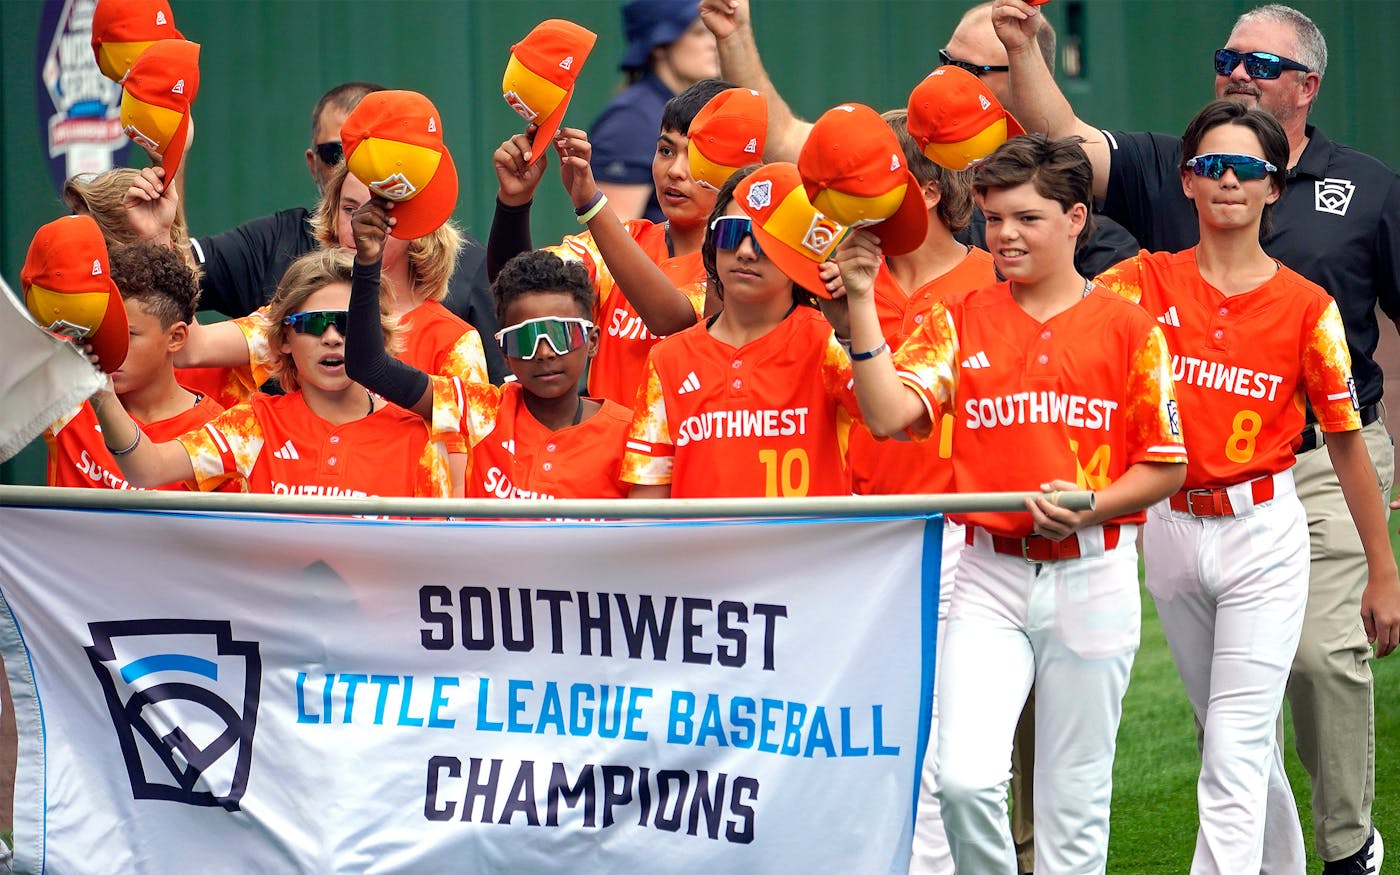 Learn more about Pearland's team in Little League World Series